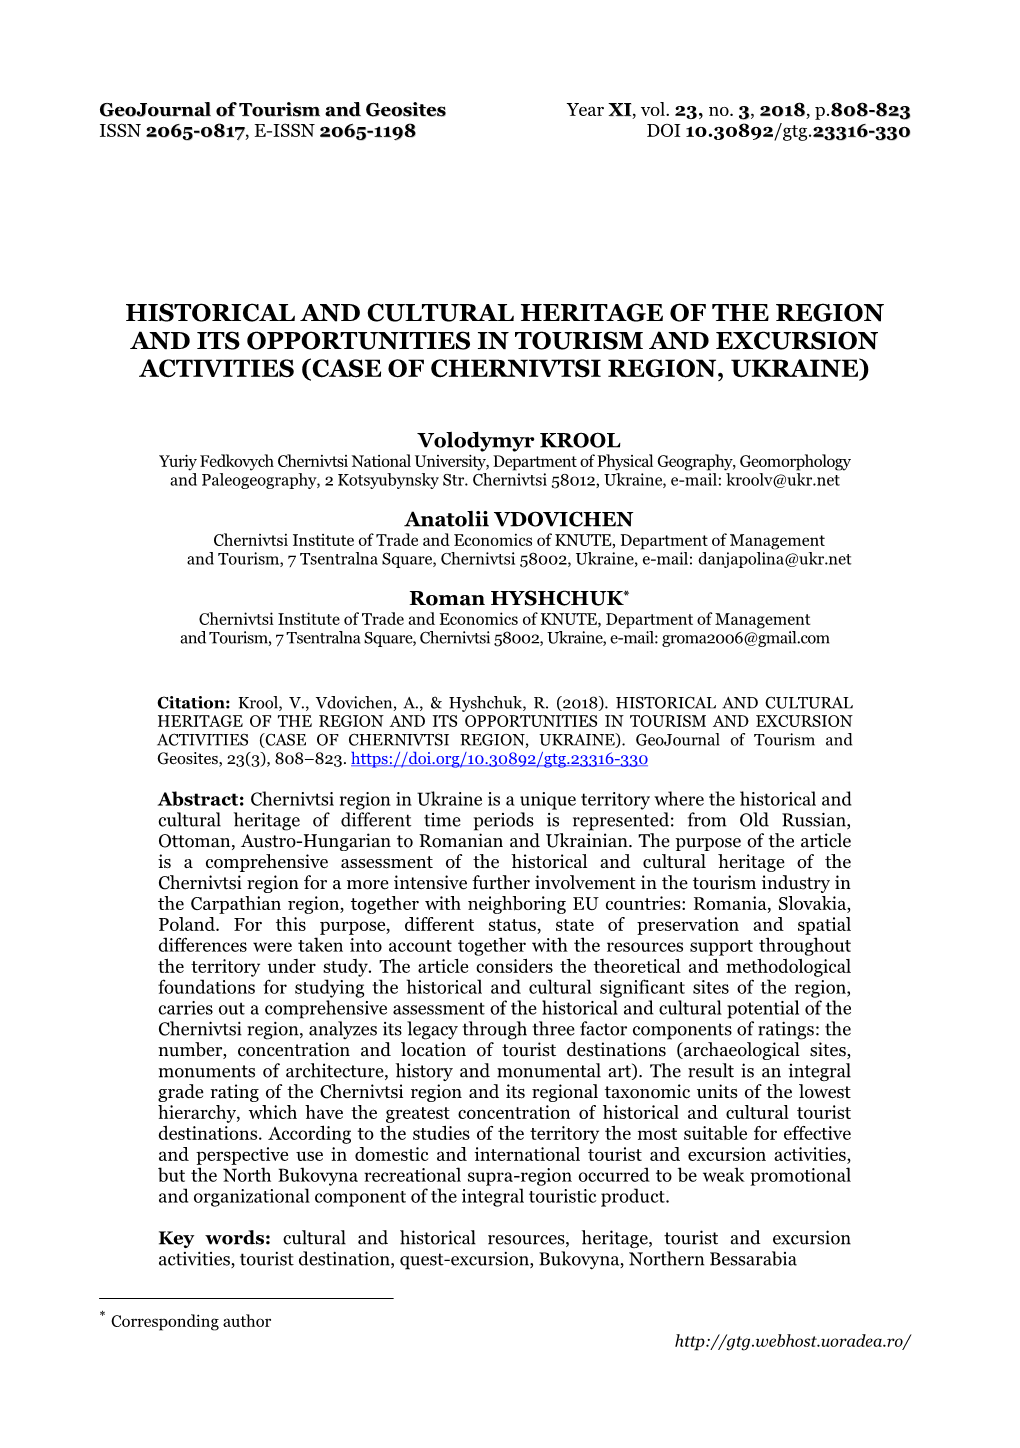 Historical and Cultural Heritage of the Region and Its Opportunities in Tourism and Excursion Activities (Case of Chernivtsi Region, Ukraine)